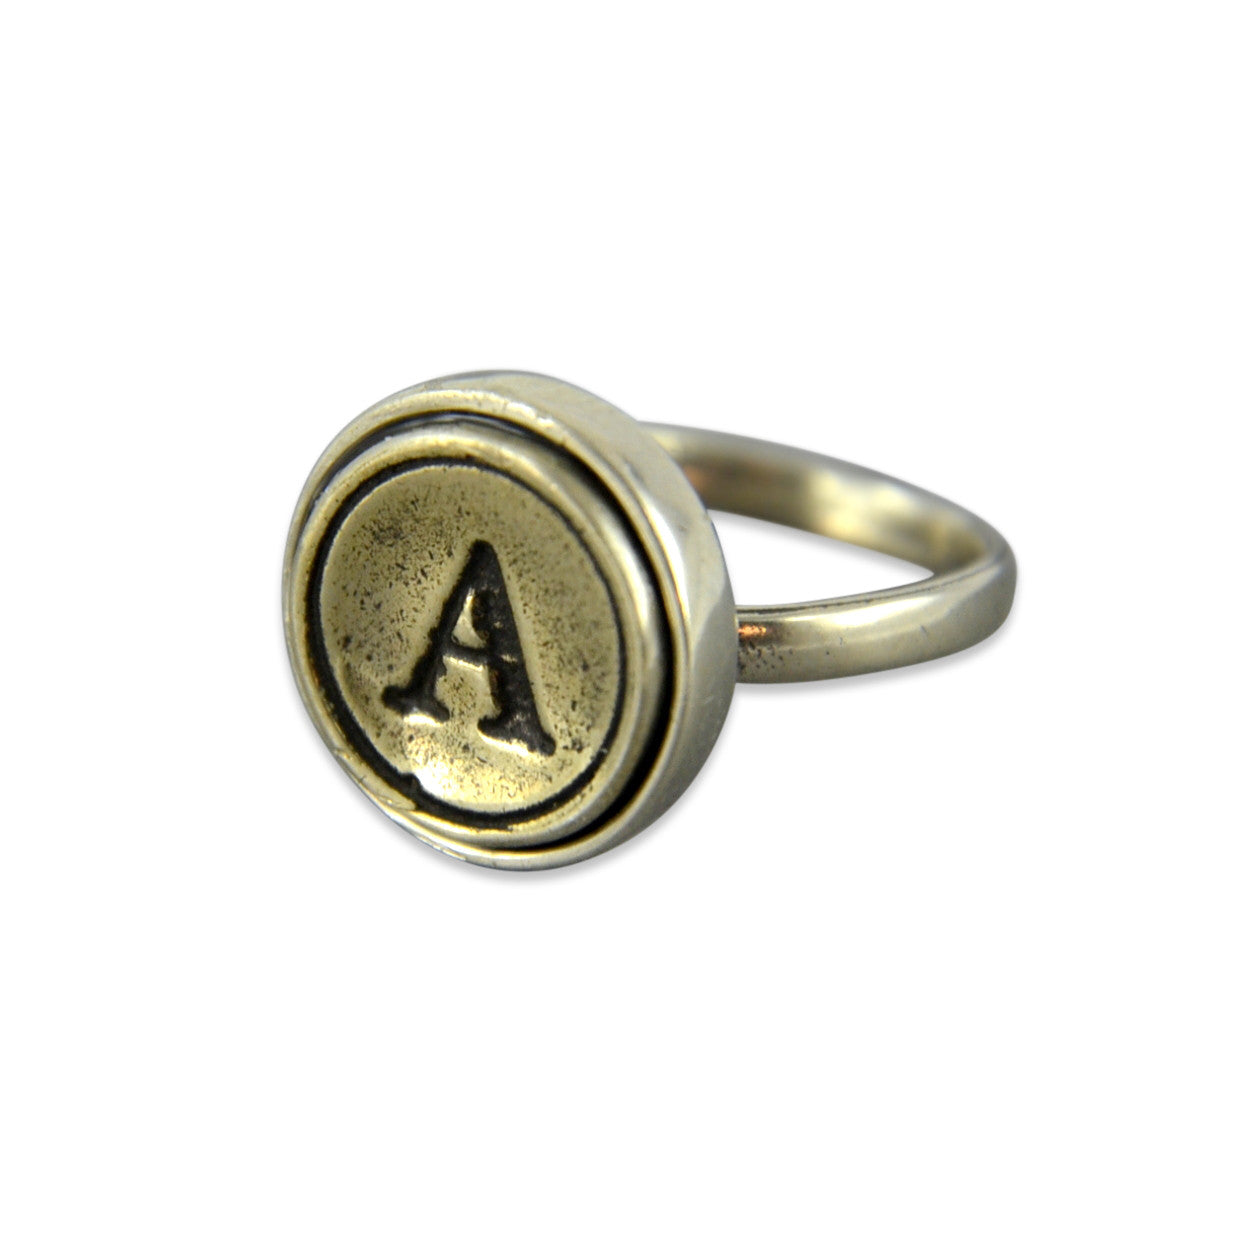 Personalized Letter Ring - Gwen Delicious Jewelry Designs